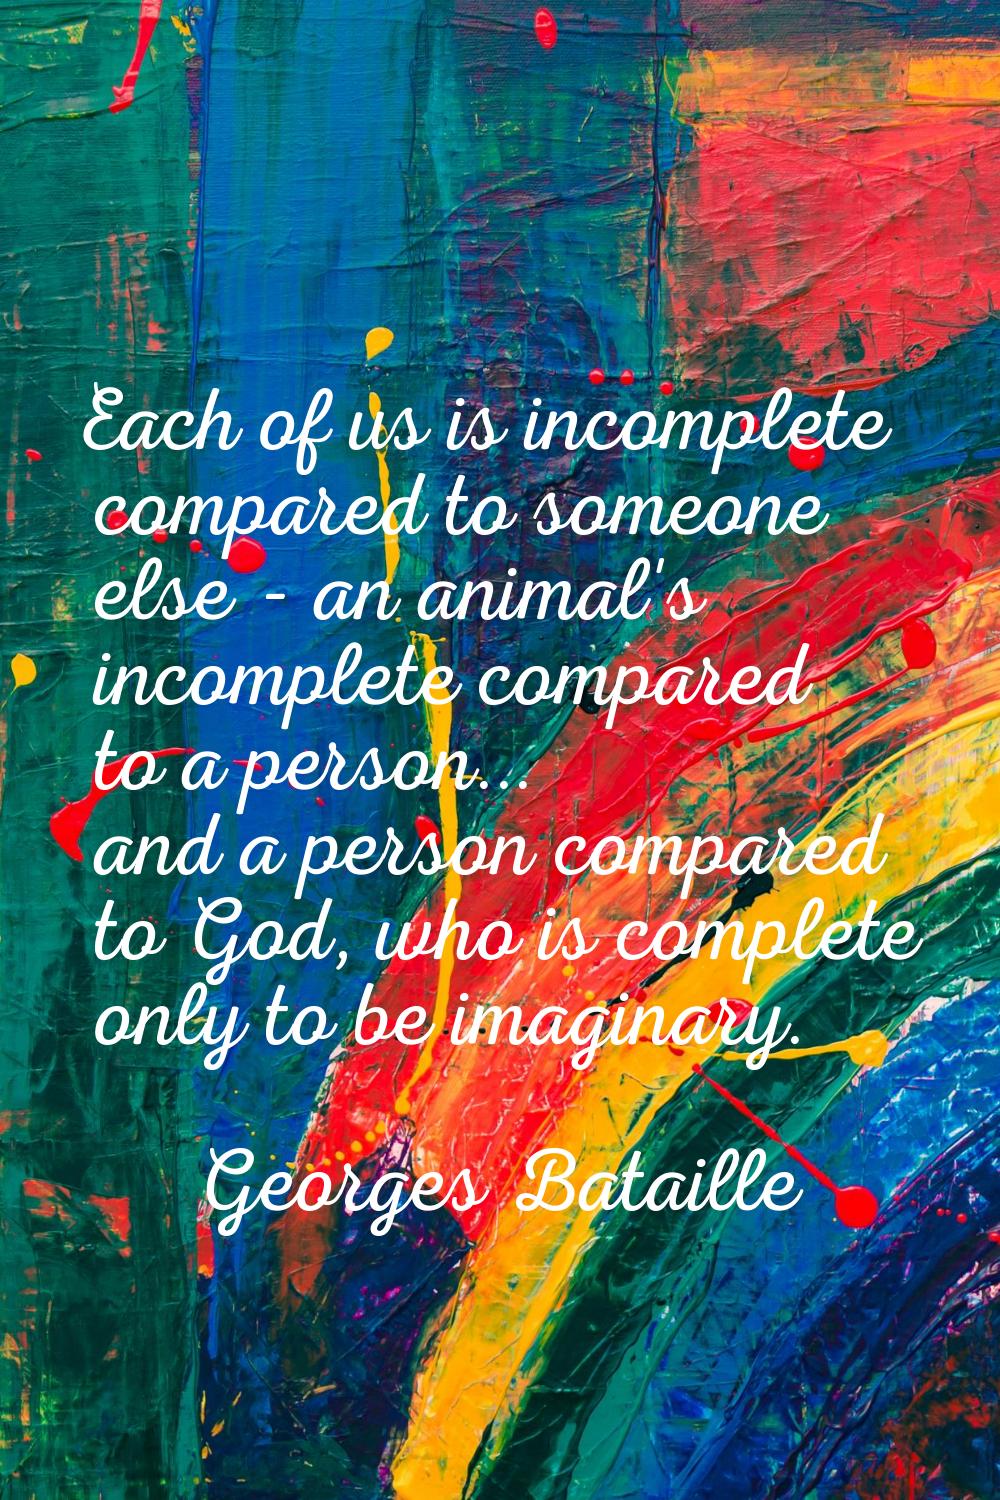 Each of us is incomplete compared to someone else - an animal's incomplete compared to a person... 